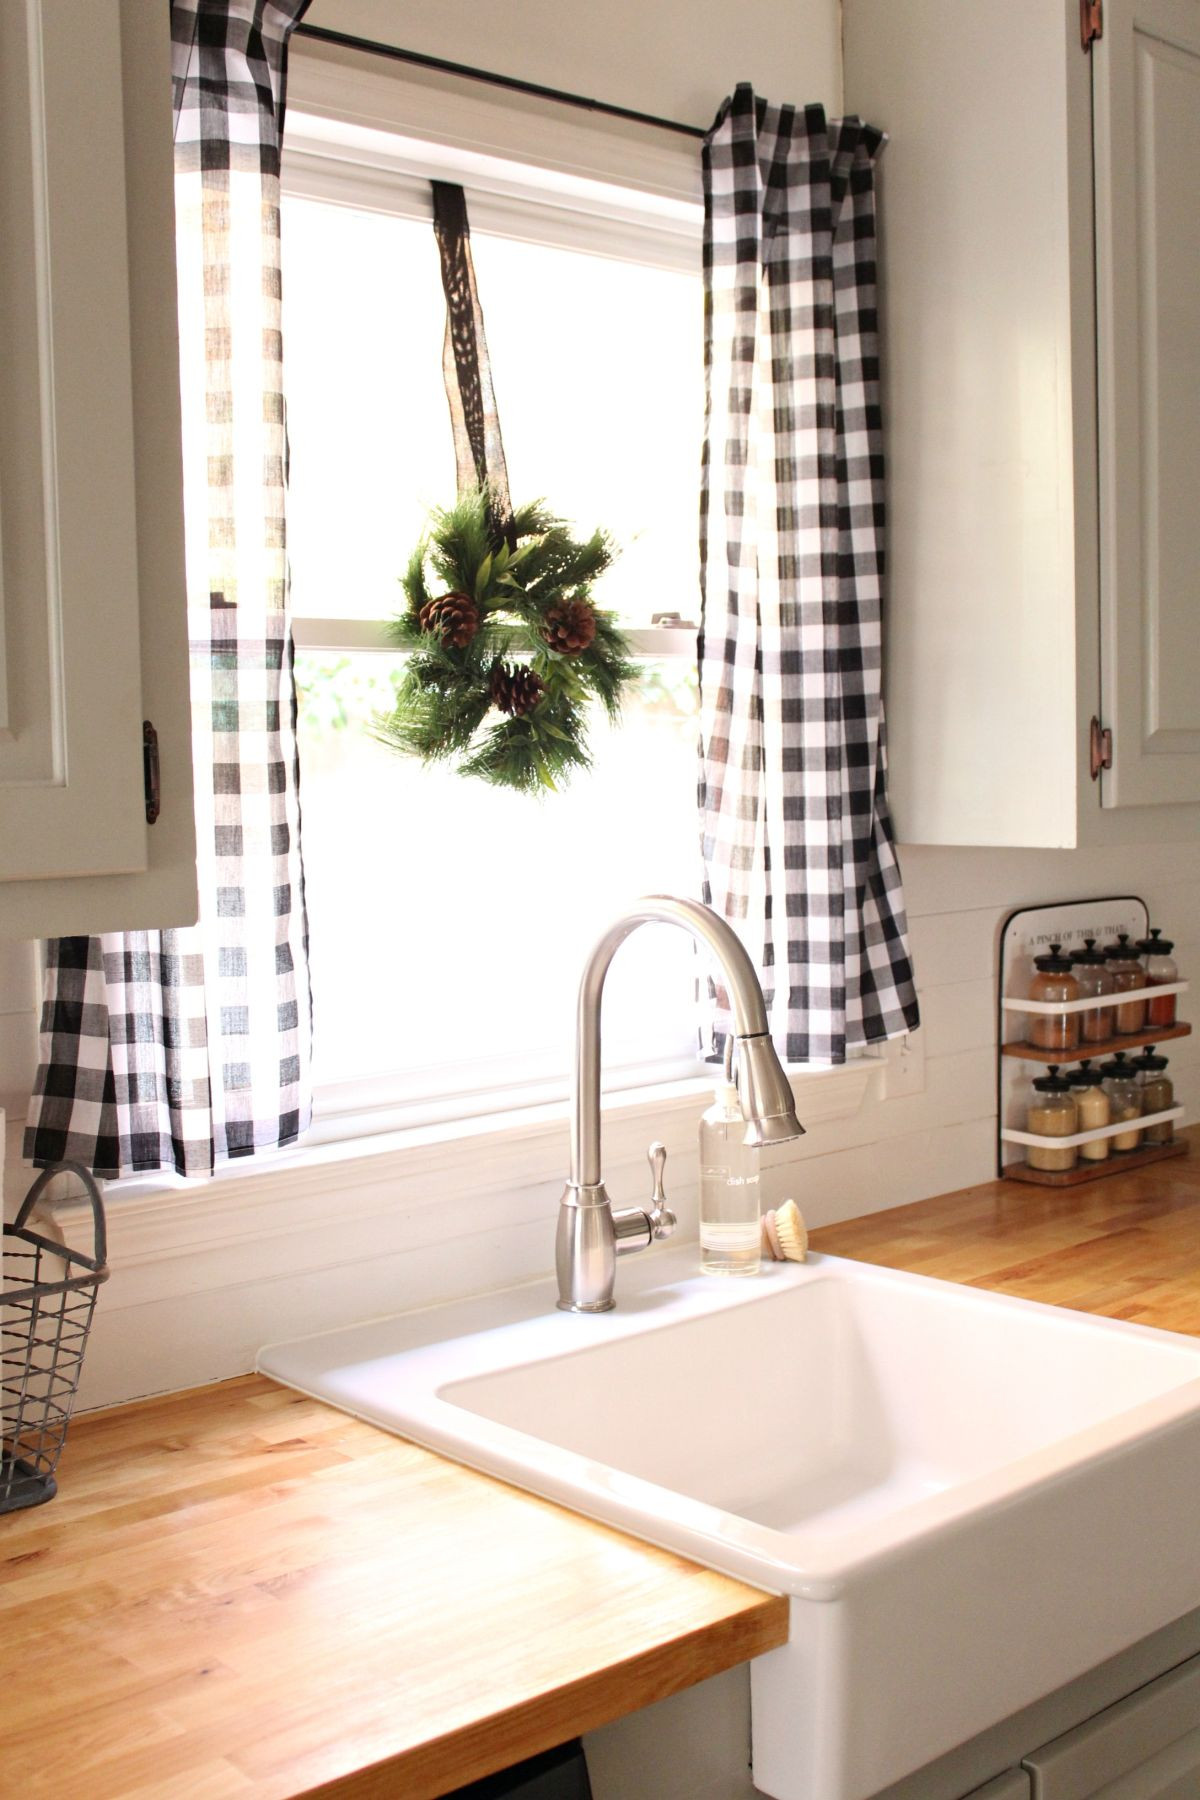 Penny'S Kitchen Curtains
 10 Best Patterns For Kitchen Curtains